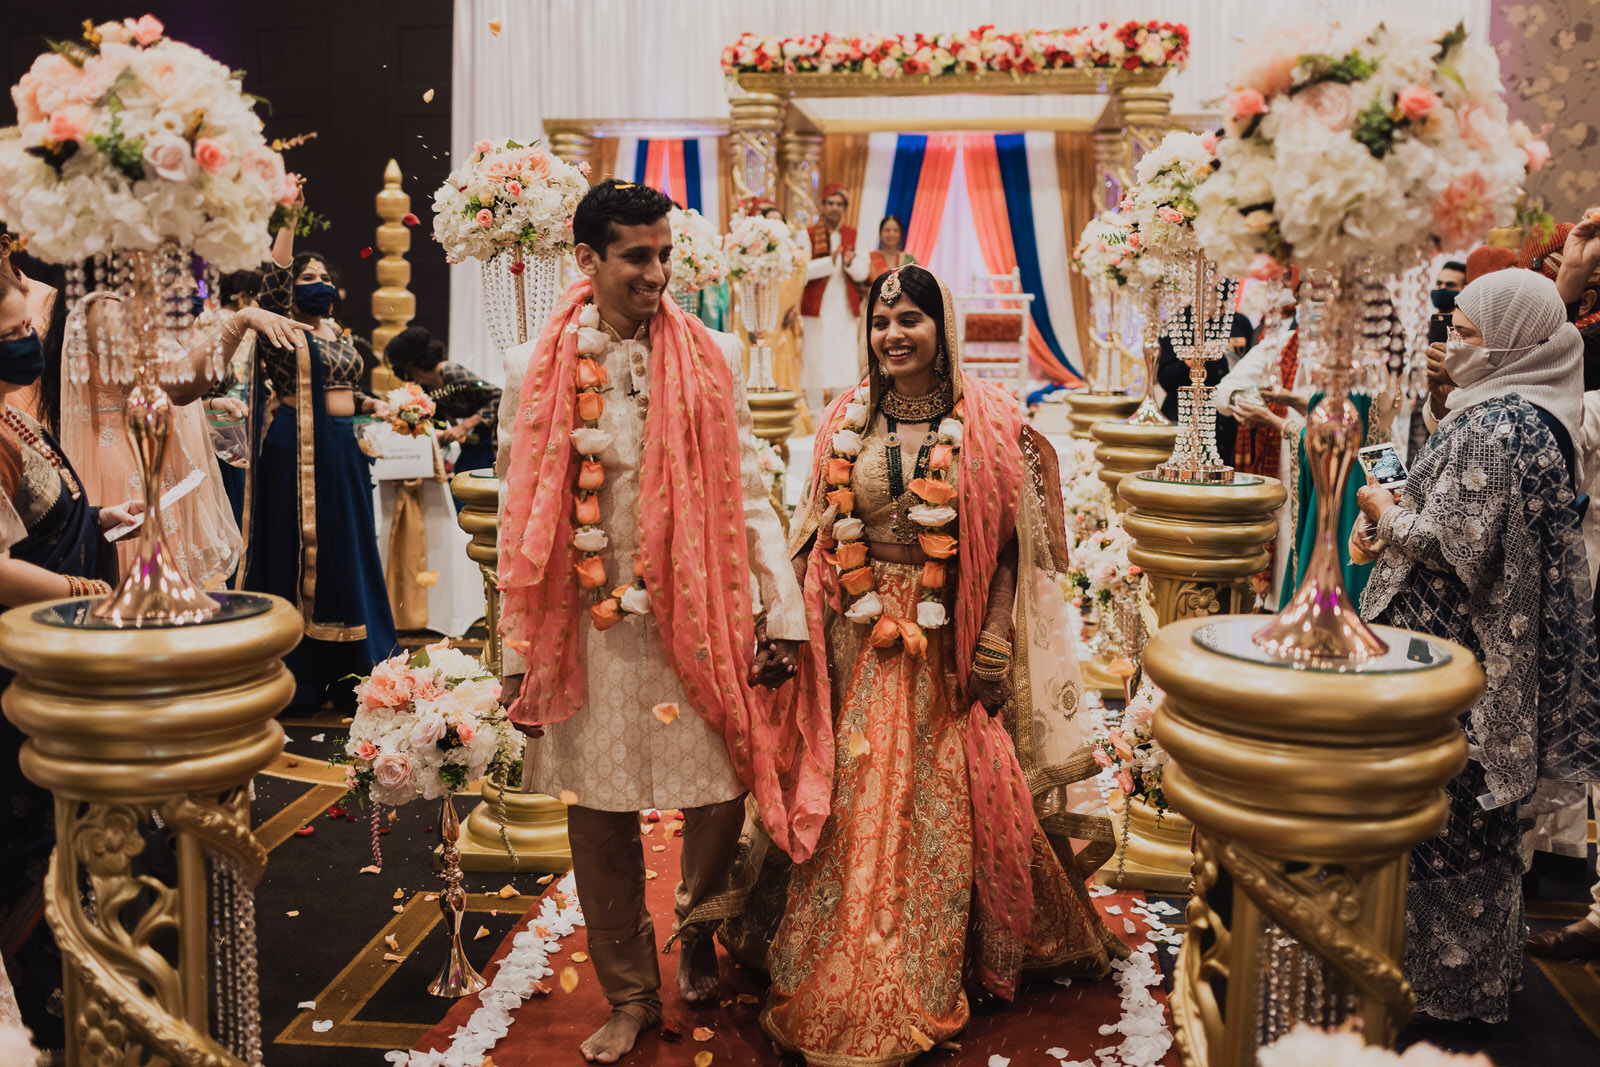 Megha and Yafeez had their traditional Indian wedding at the Sheraton in Overland Park.